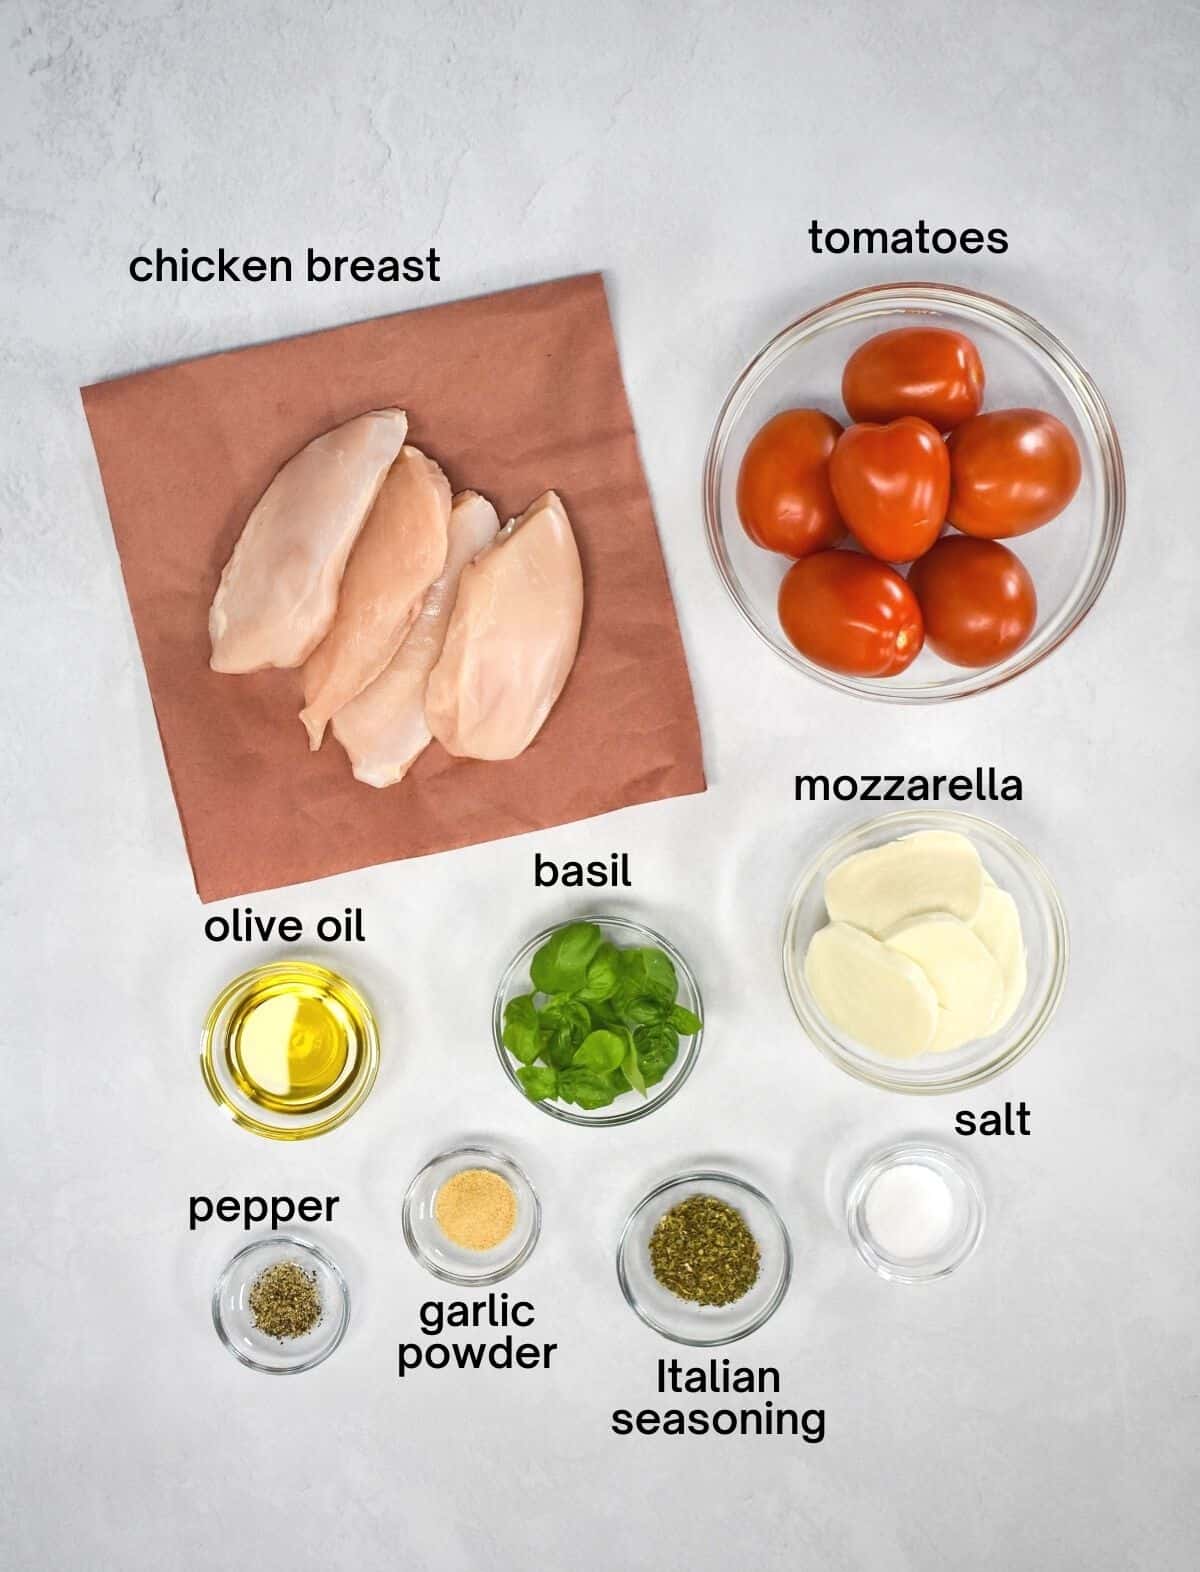 The ingredients for the dish arranged in glass bowls and set on a white table. The chicken is set on butcher paper. Each ingredient is labeled in small black letters.